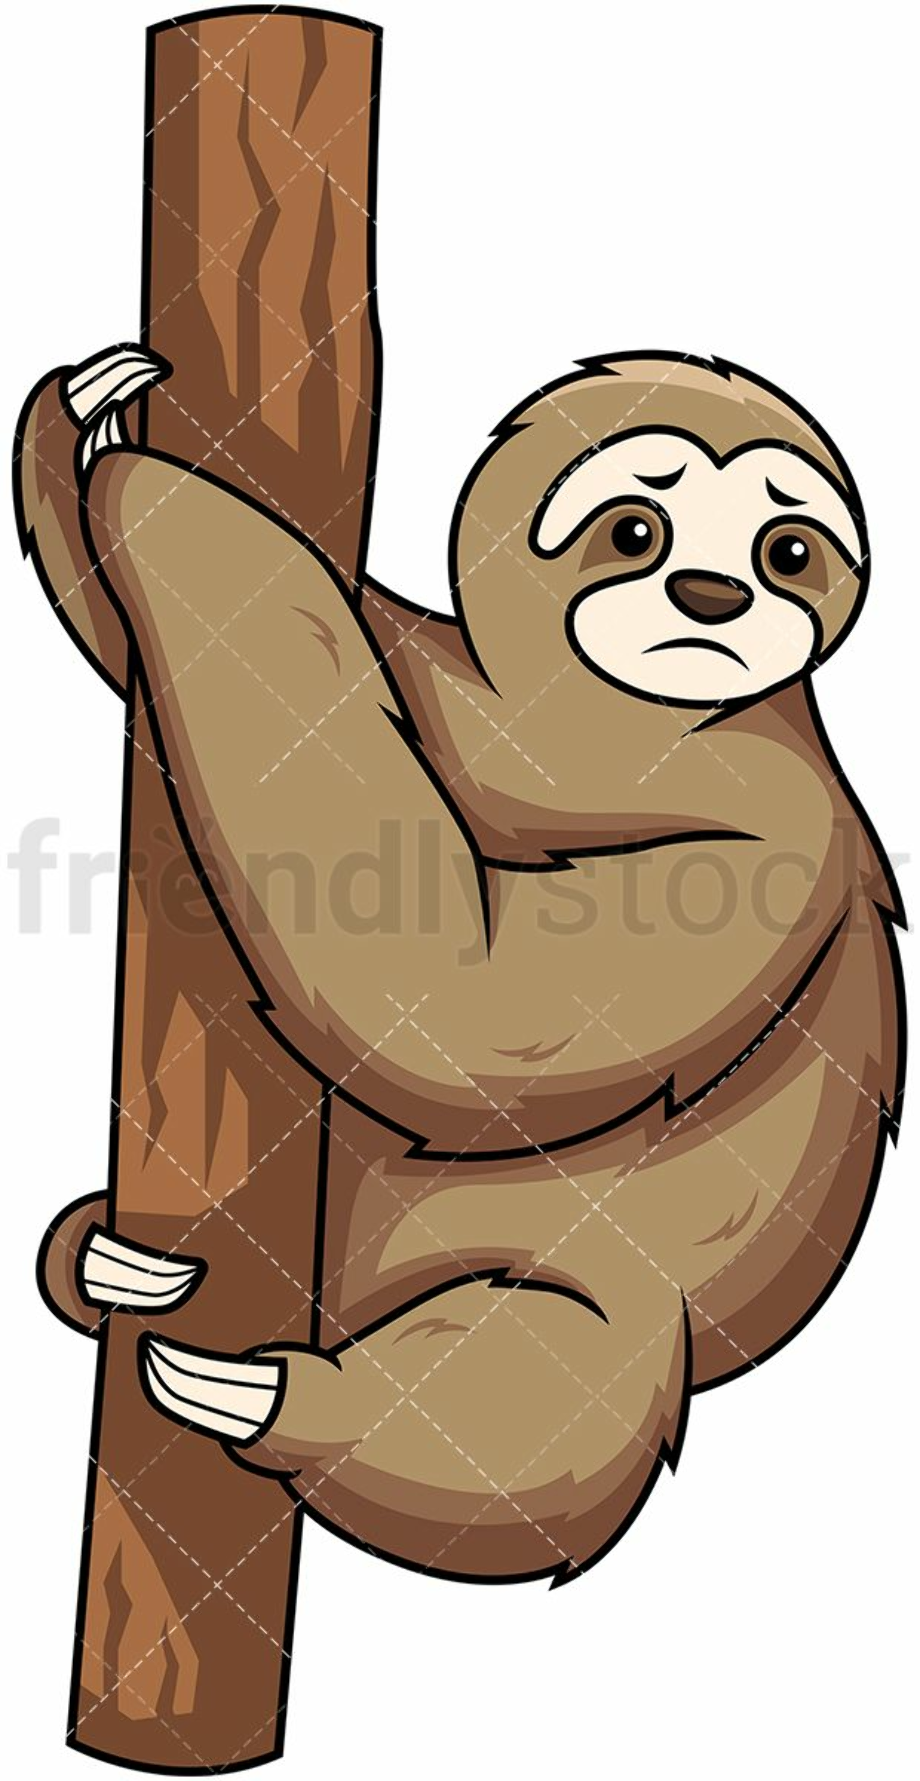 sloth clipart brown